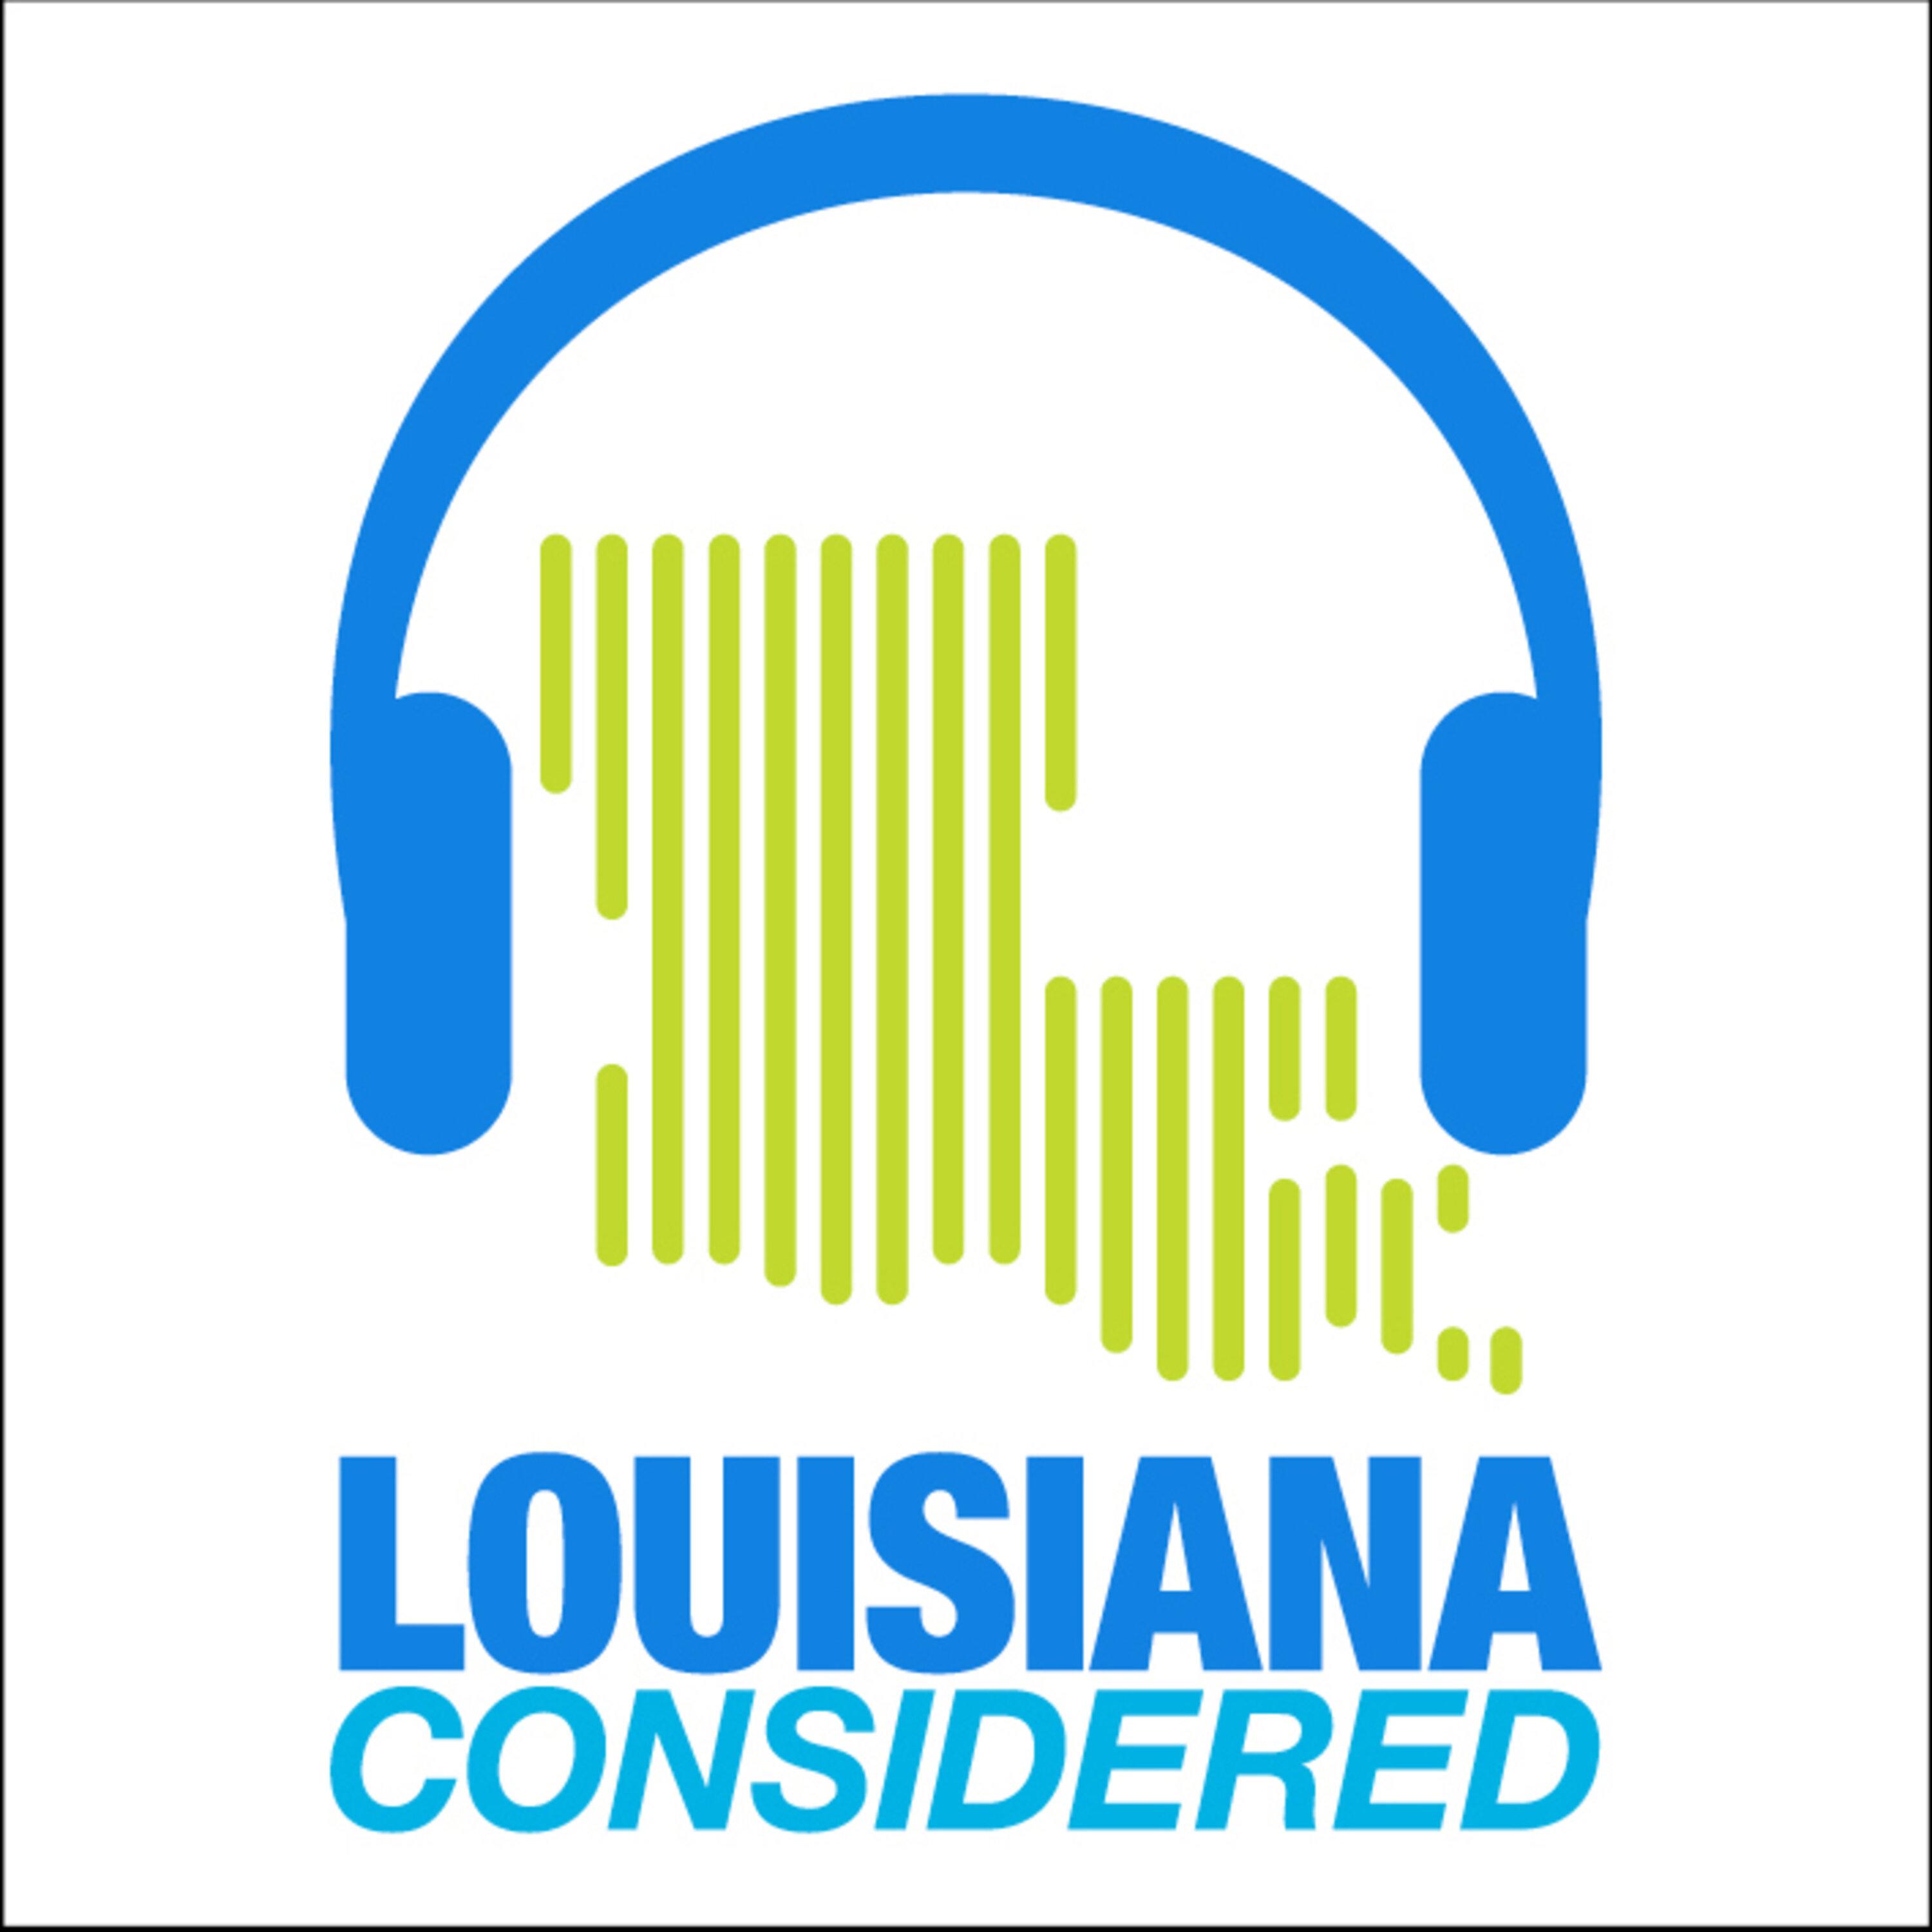 Thumbnail for "Louisiana Considered: What’s on the ballot this November?".